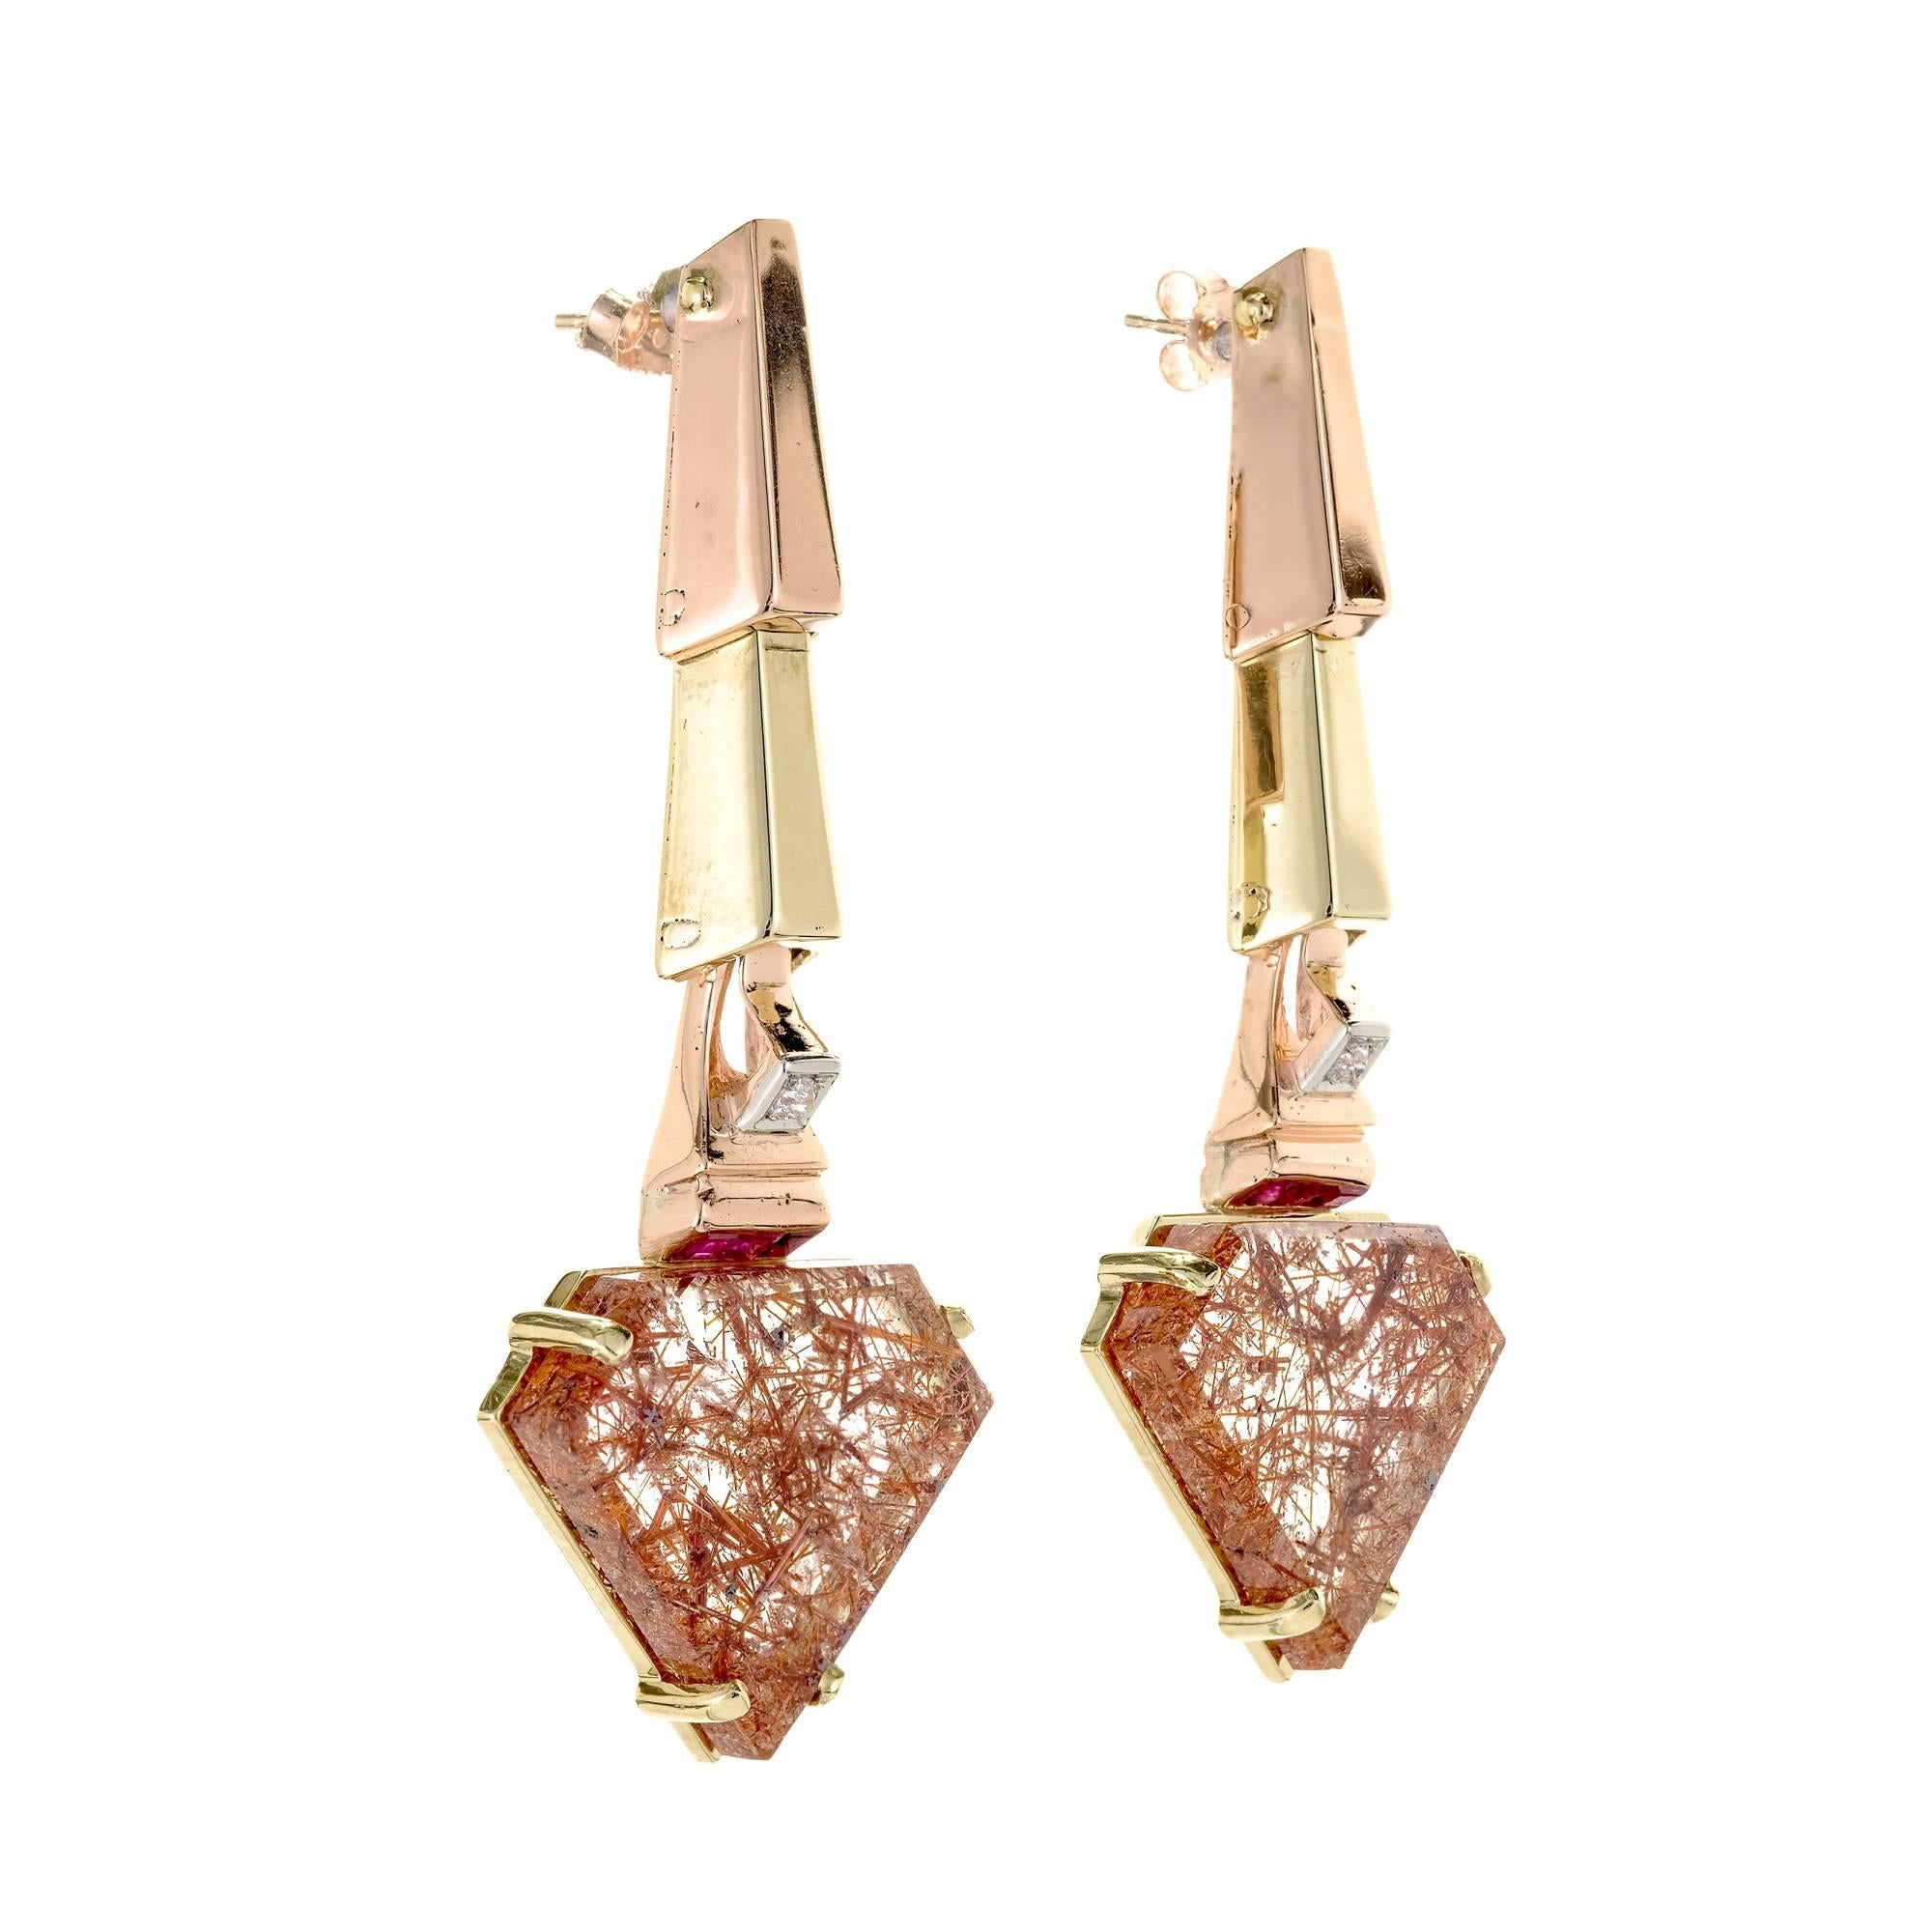 Retro 1935-1940 rose and green gold dangle earrings of angular design with rose gold top links, green gold second links and channel set Rubies and old European cut diamonds. Rutilated Quartz bottoms. A wonderful Retro jewel.

2 flat diamond shape